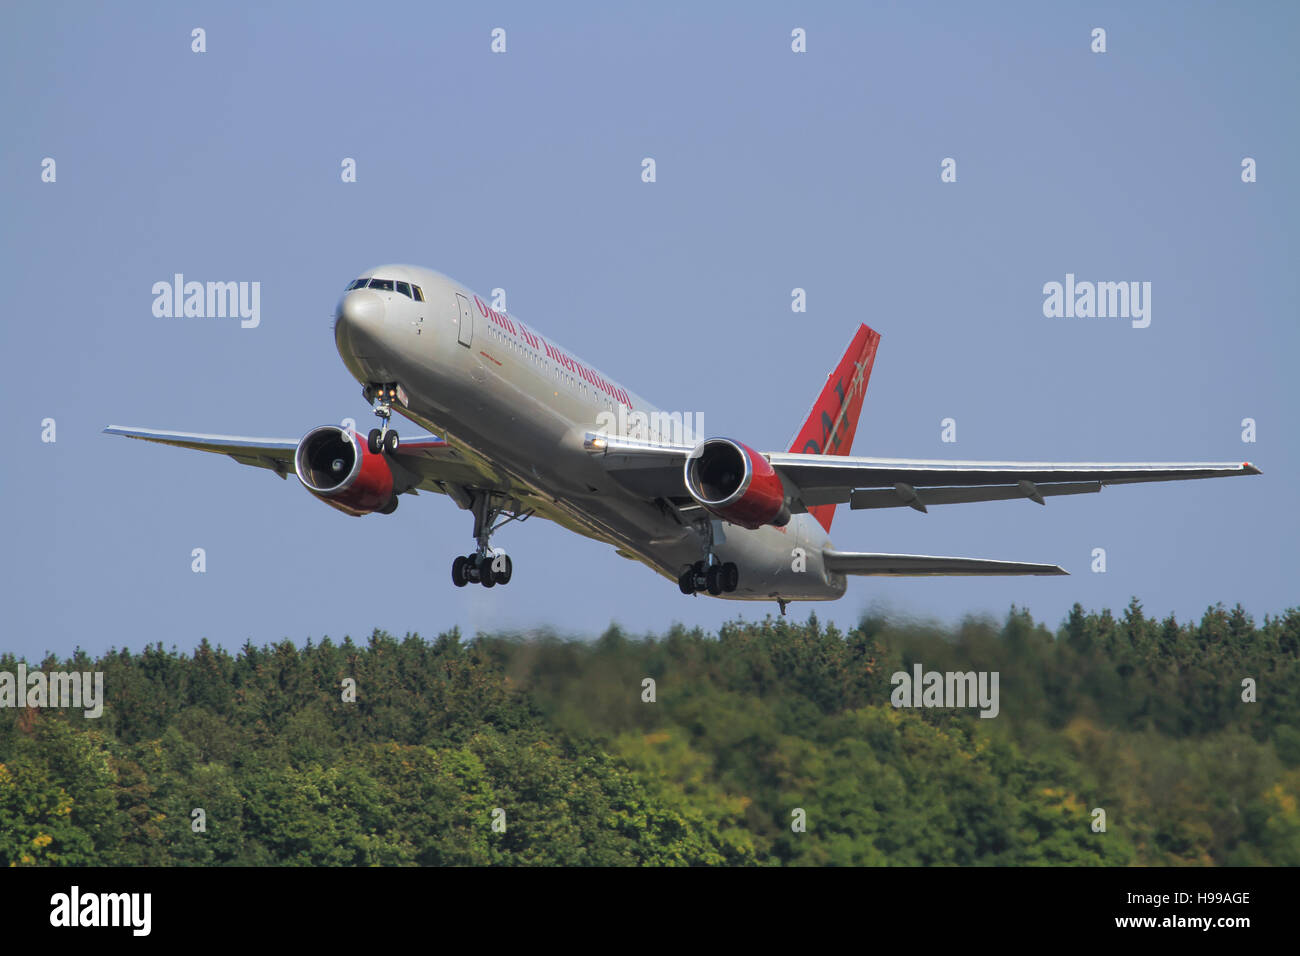 Hahn/Germany September12, 2012: Boeing 767 from Omni at Hahn Airport. Stock Photo